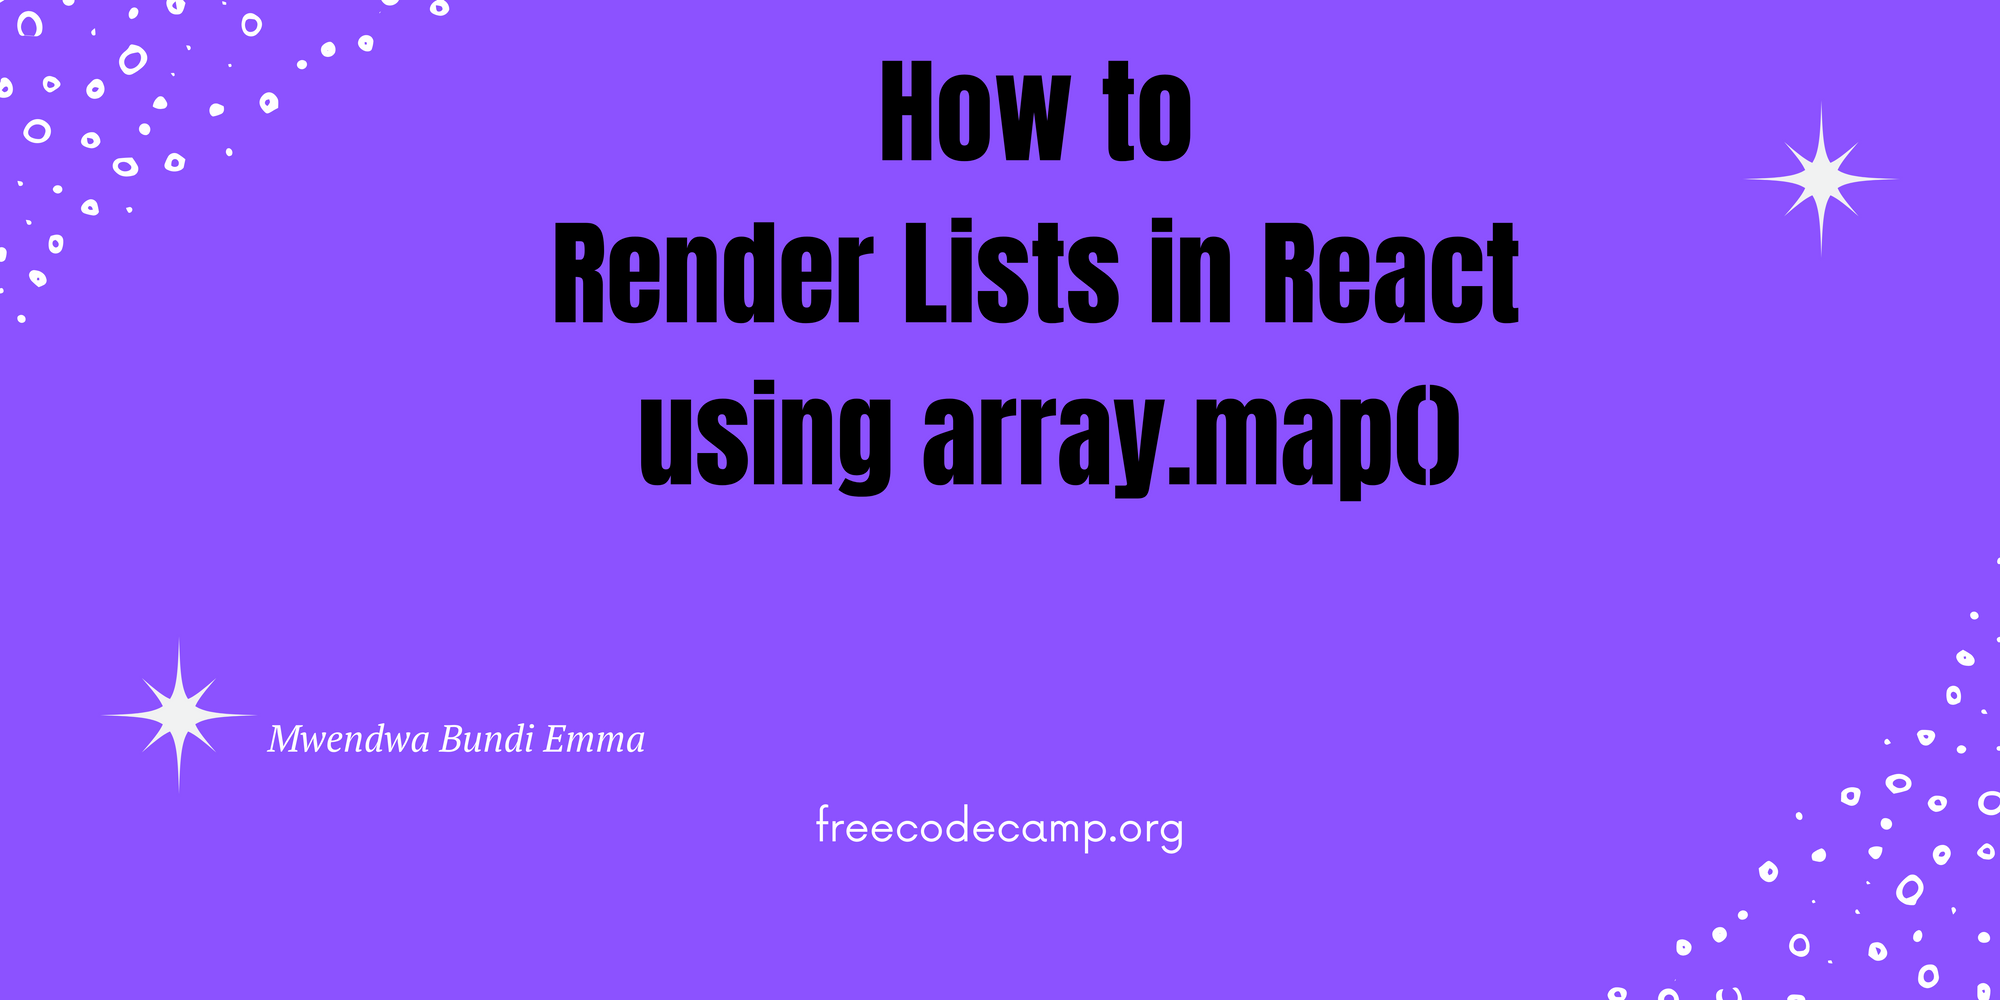 How to Render Lists in React using array.map()